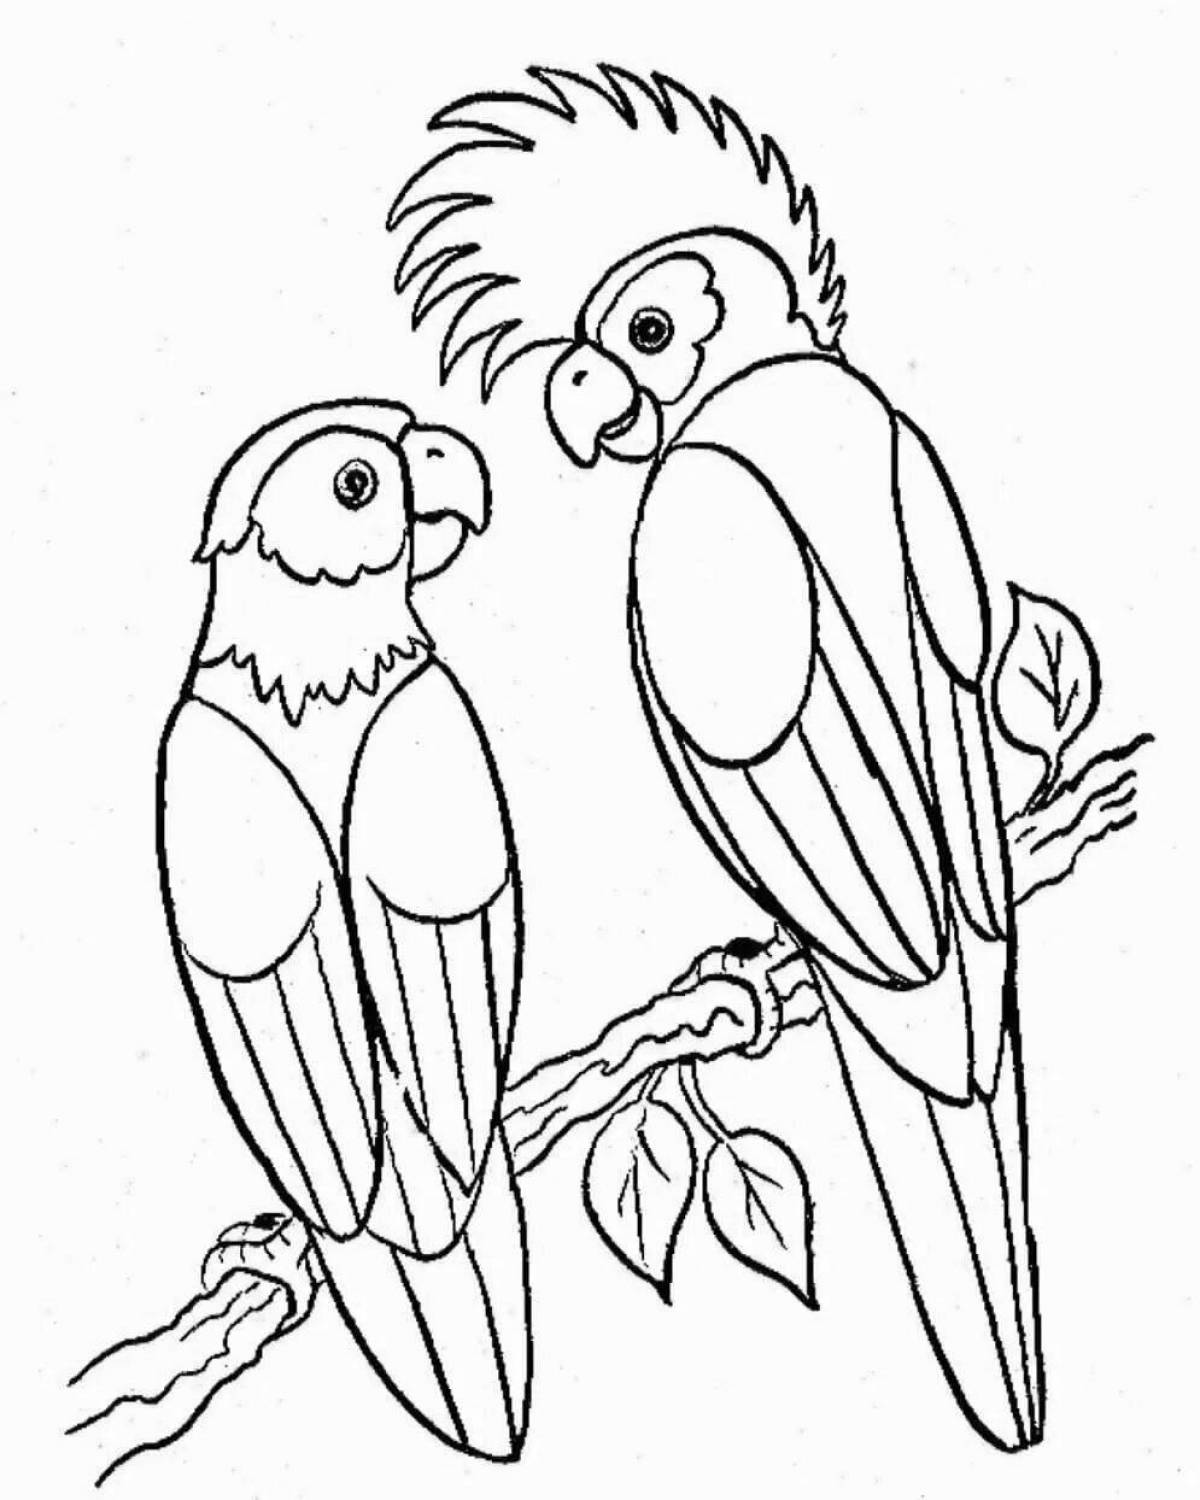 Joyful animal and bird coloring pages